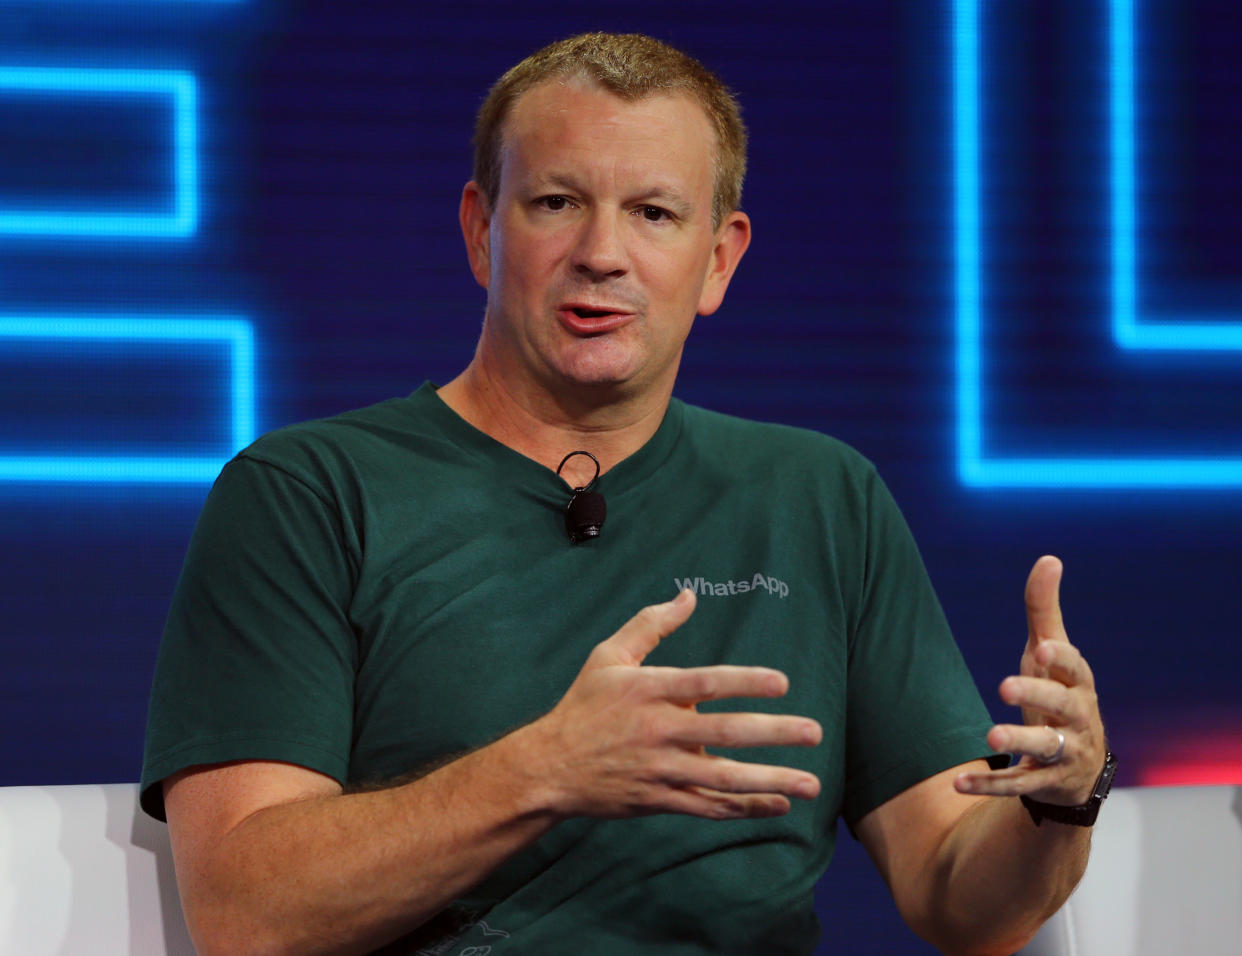 Brian Acton, co-founder of WhatsApp (Photo: Mike Blake / Reuters)